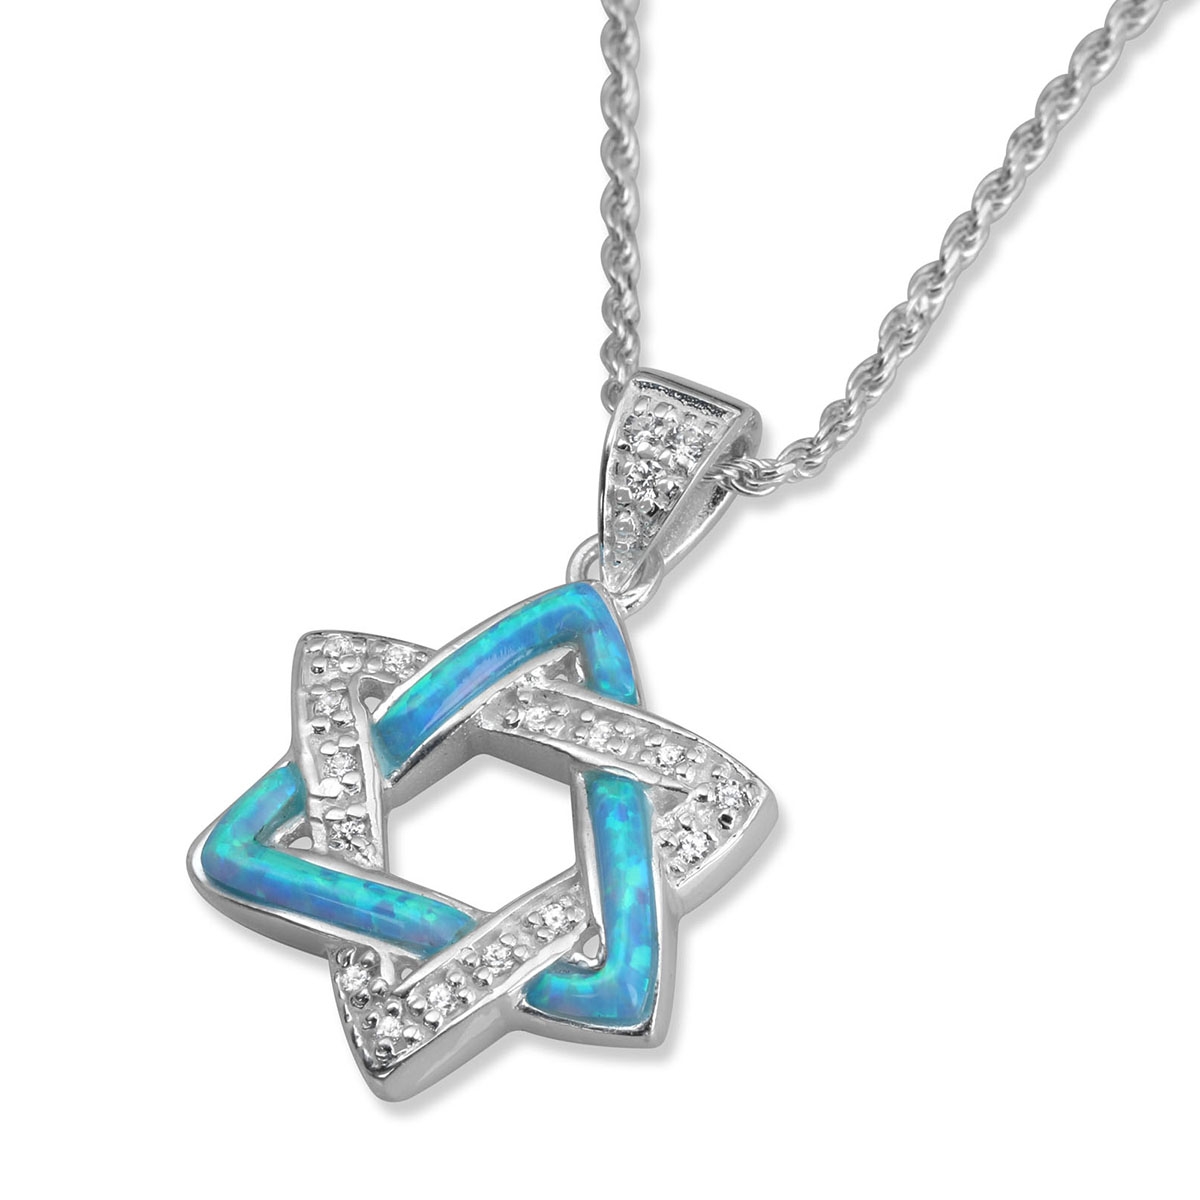 Silver and Opalite Interlocked Star of David Necklace with Zirconia Accents - 1